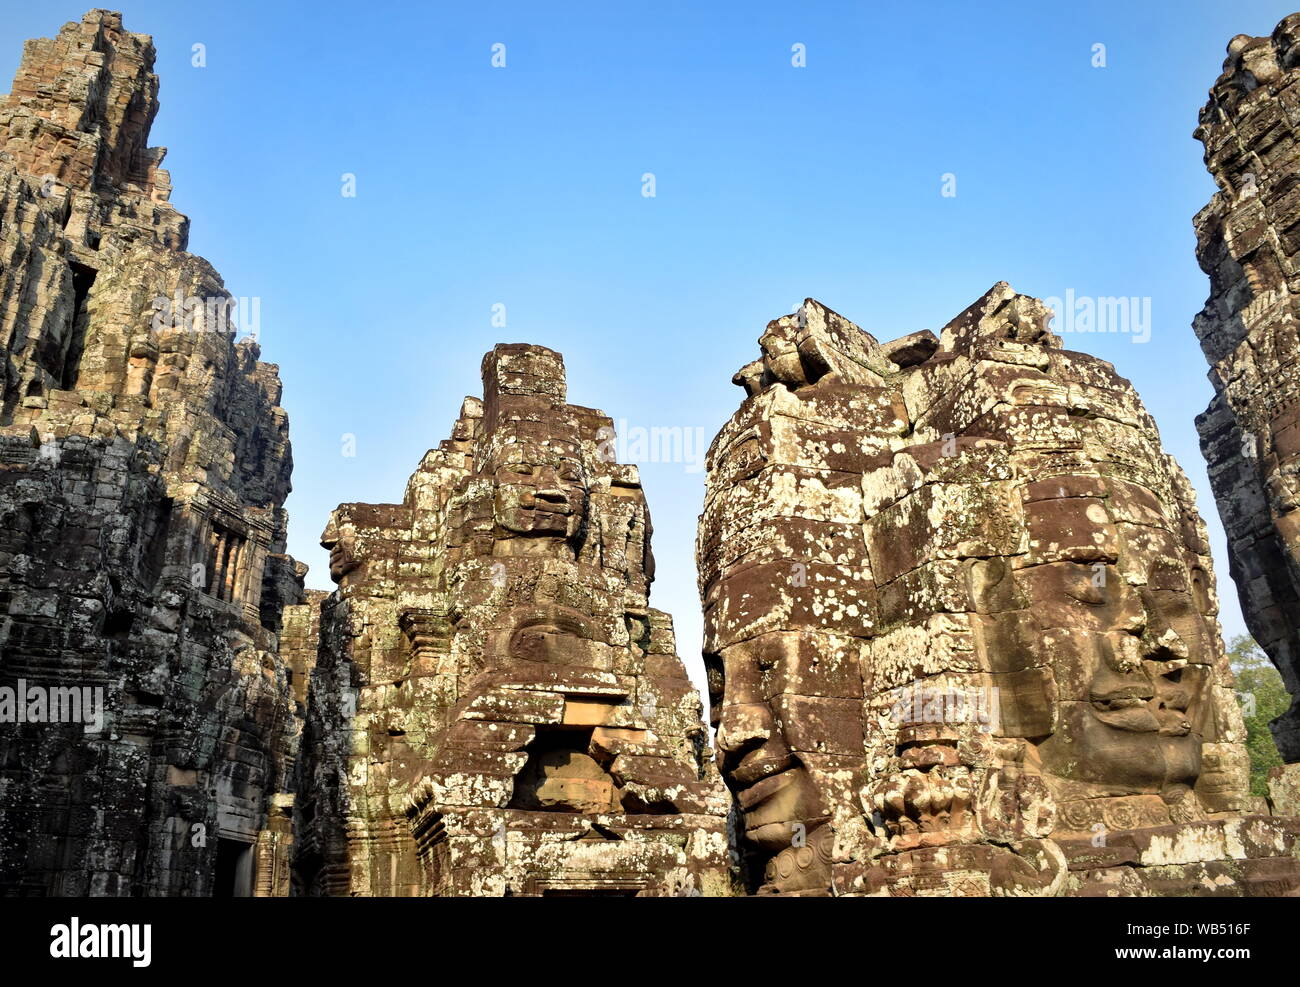 Buddha towers of Bayon ancient stone temple in Angkor Thom, Cambodia Stock Photo